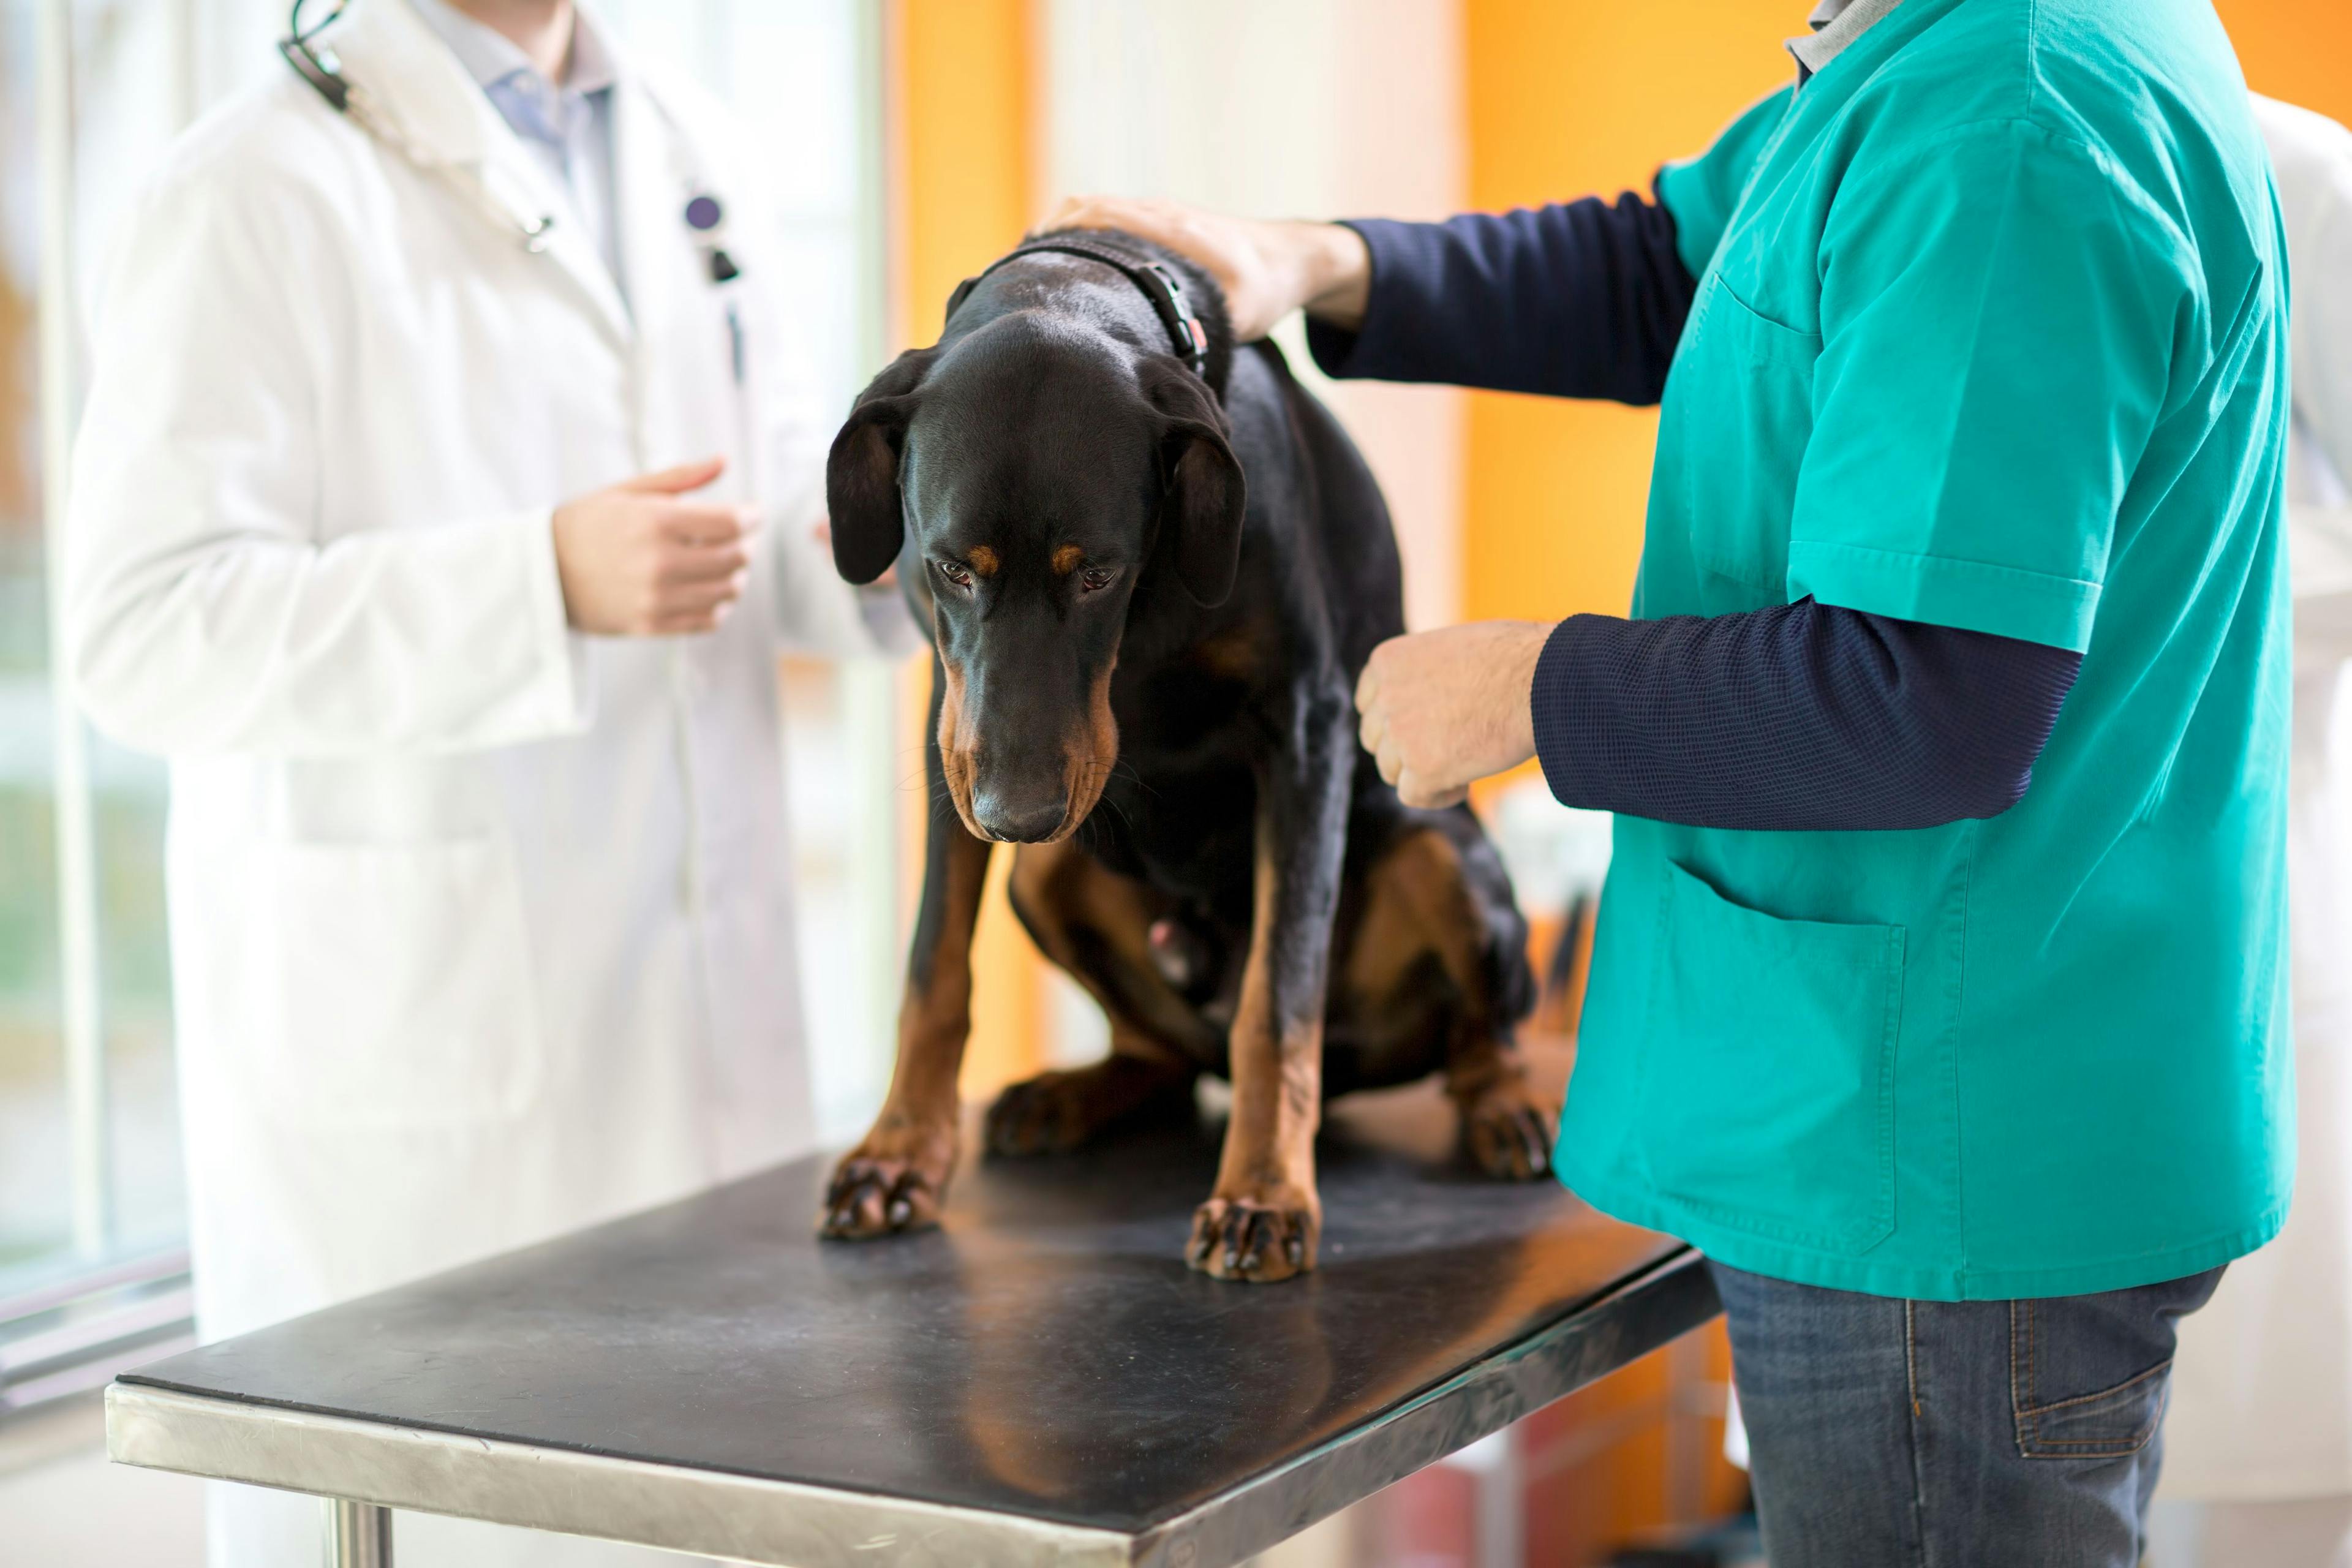 FDA approves intratumoral injection for dogs